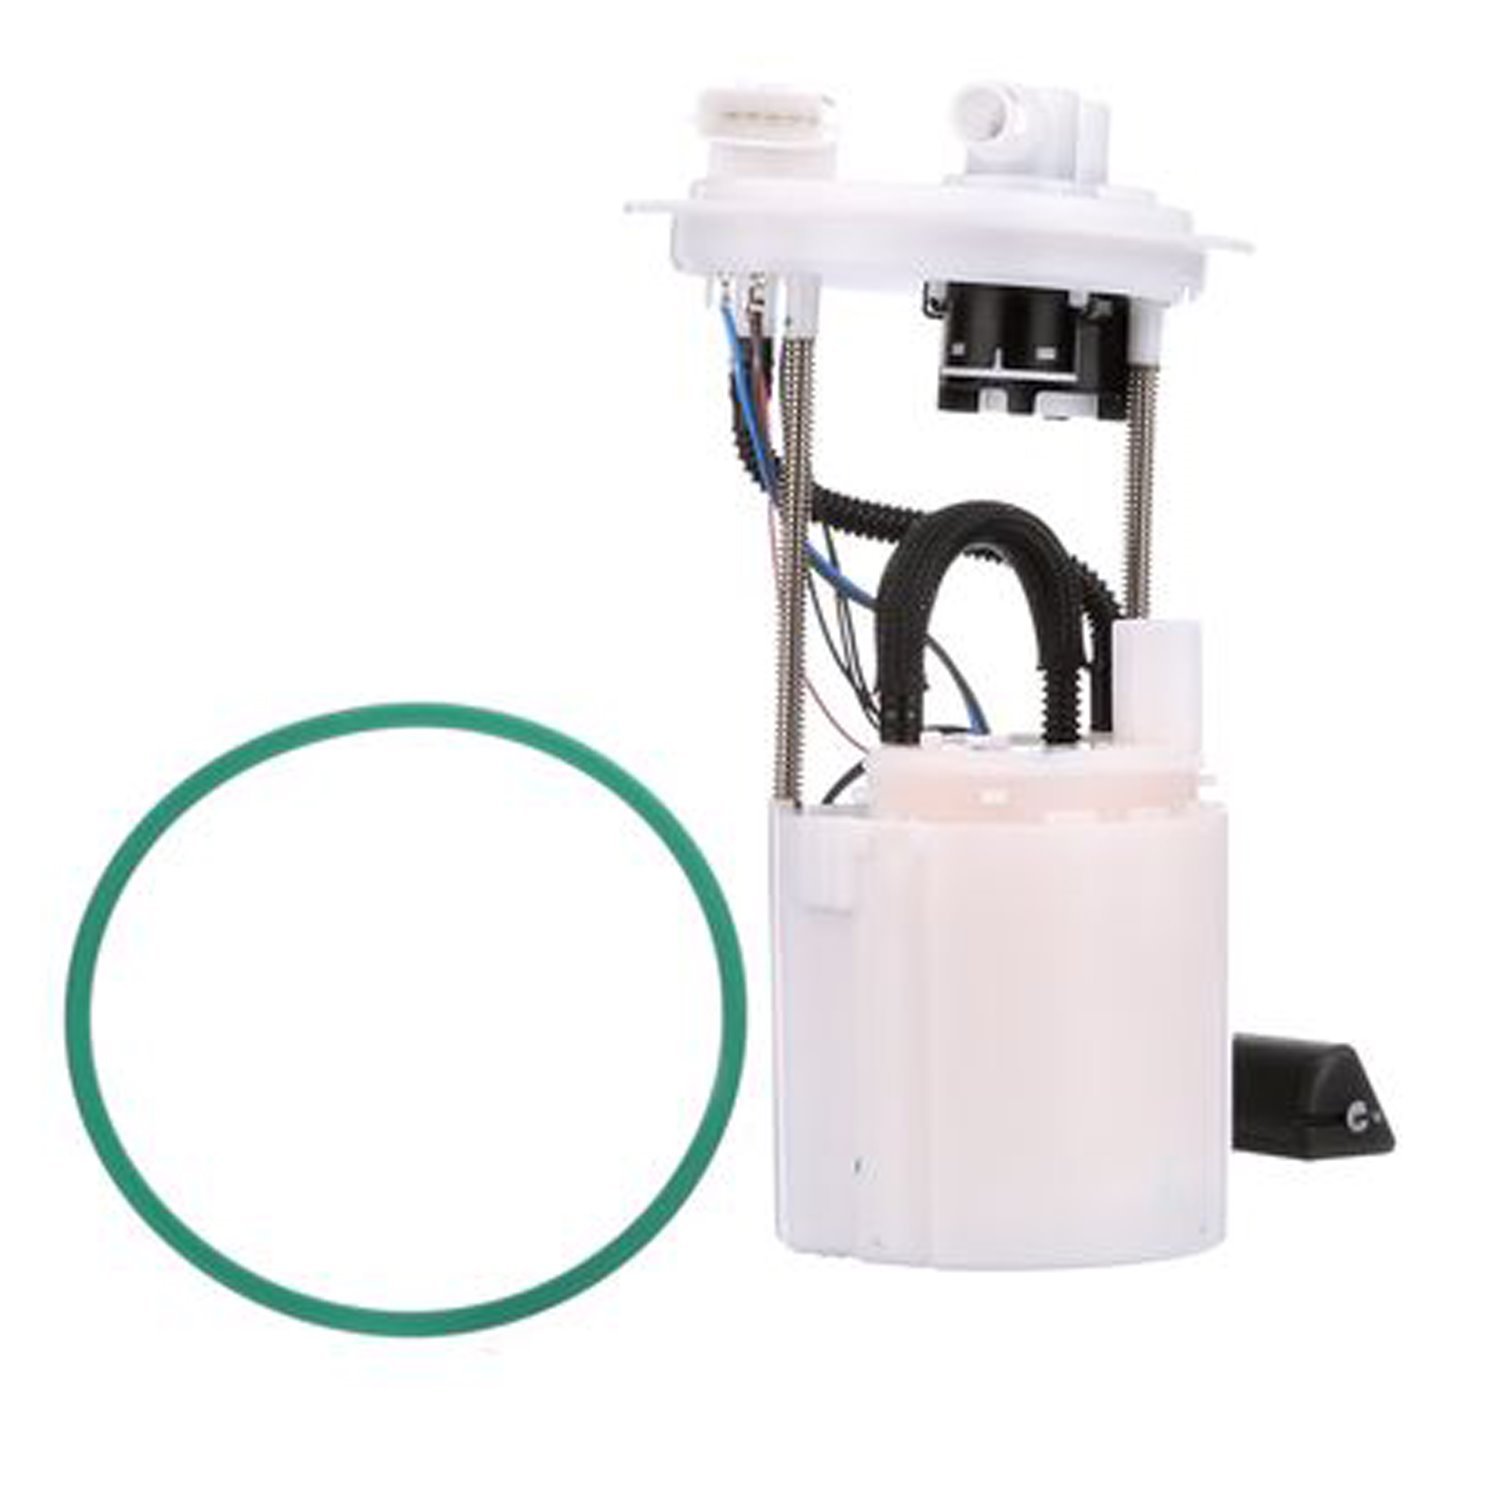 OE Replacement Fuel Pump Module Assembly for 2012-2016 Nissan Versa